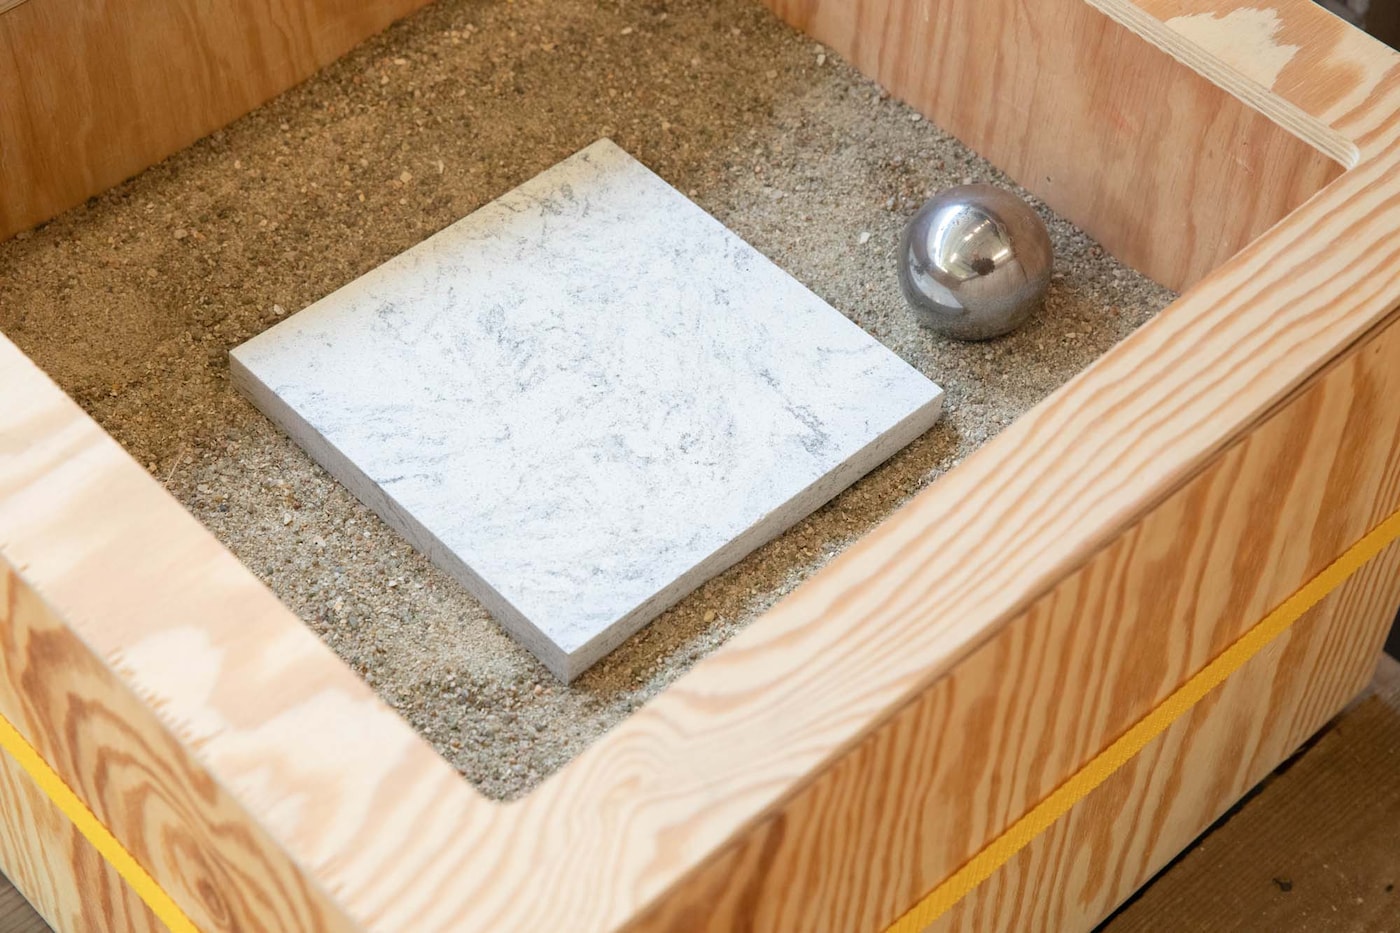 A square piece of LOCKEBO worktop in a wooden box filled with sand beside a metal ball used.